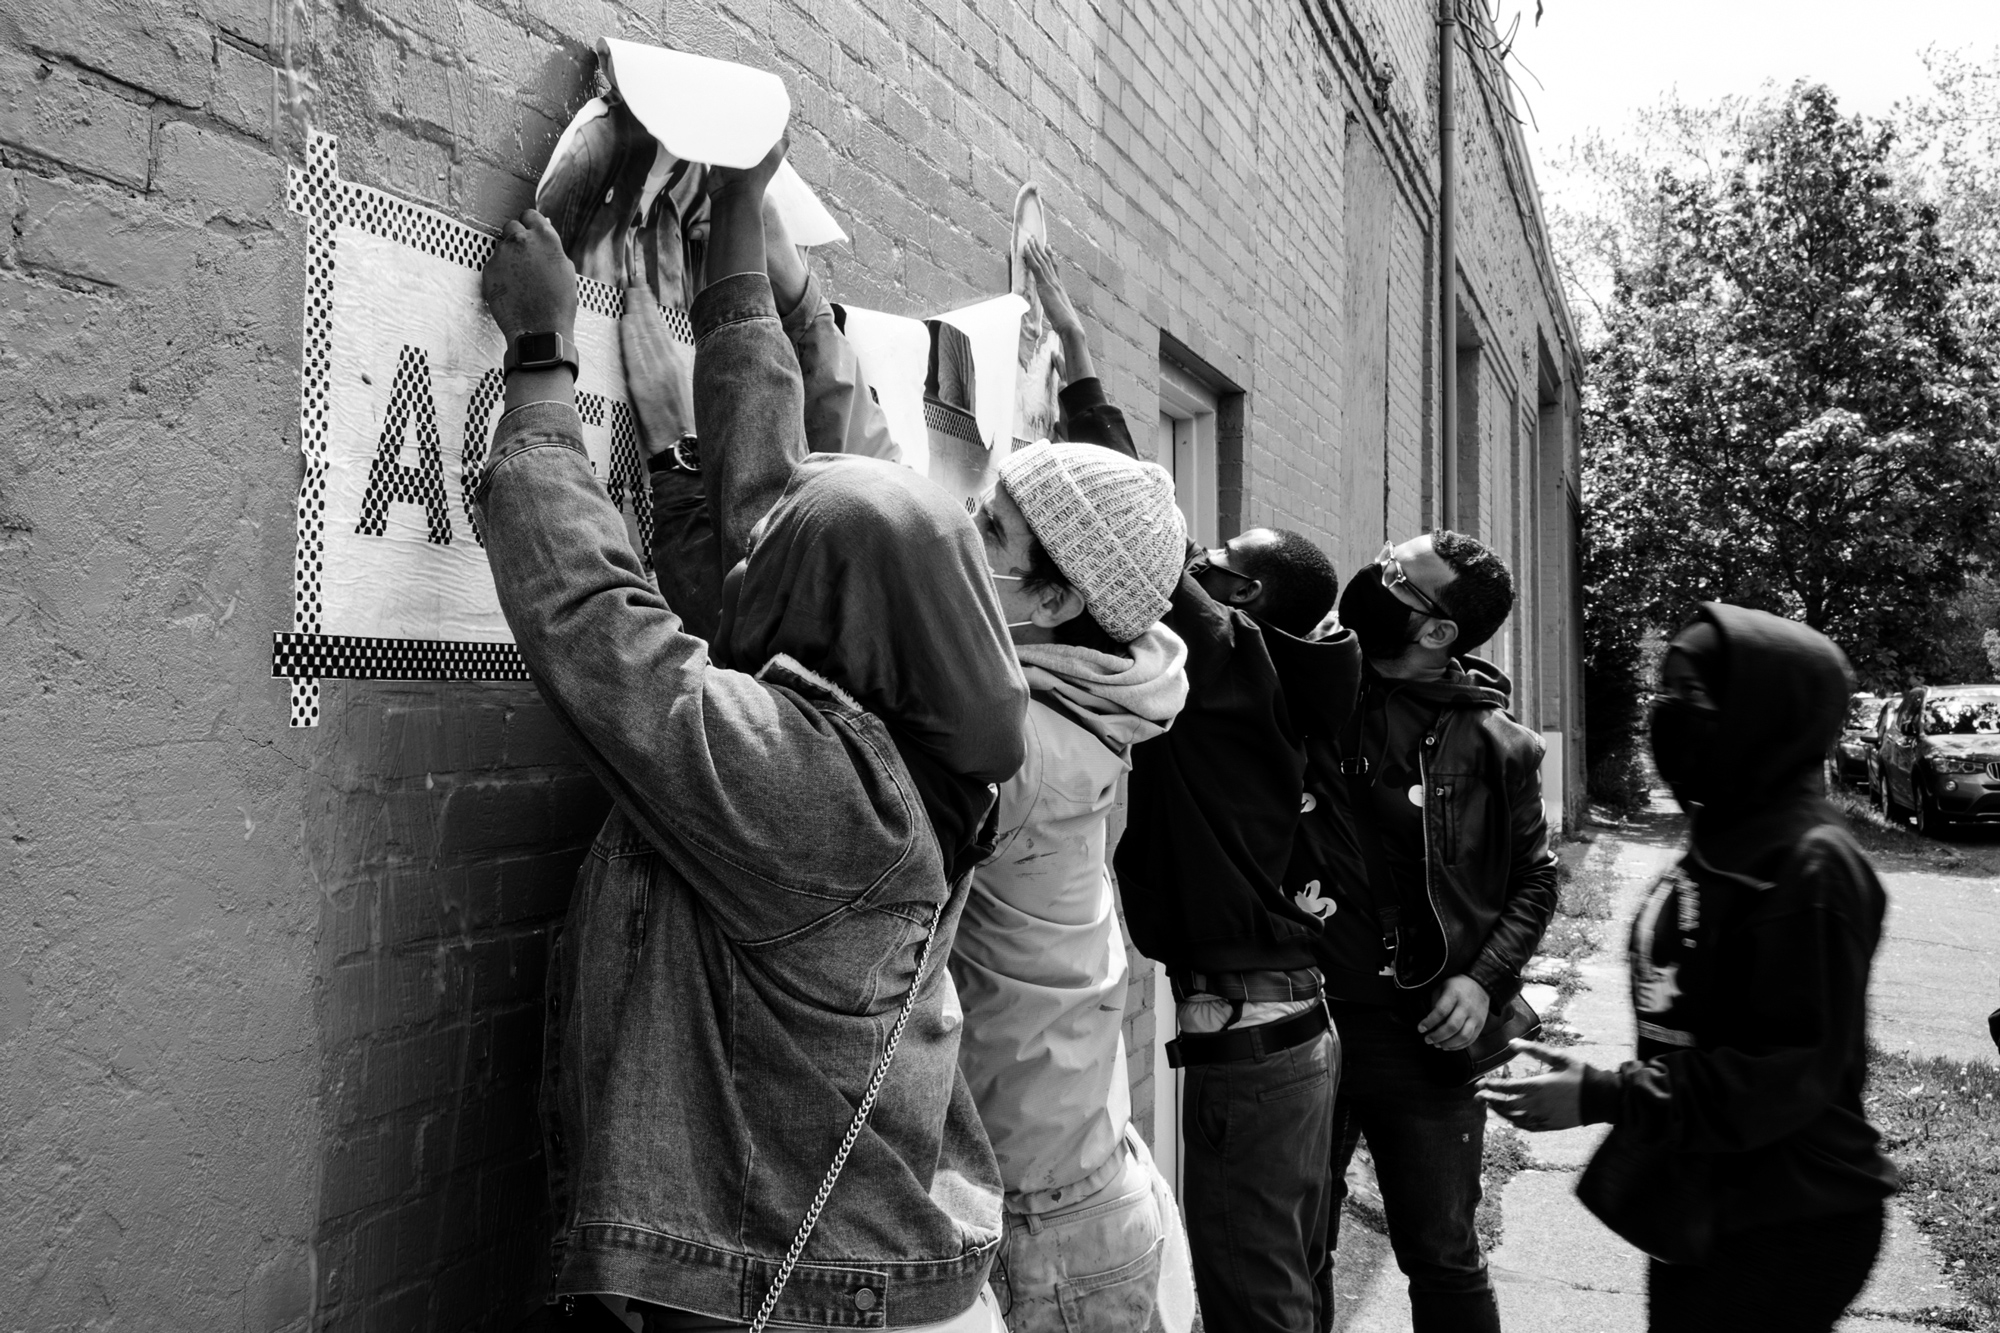 black and white photo of people hanging the agent of change sign on the side of a brick building